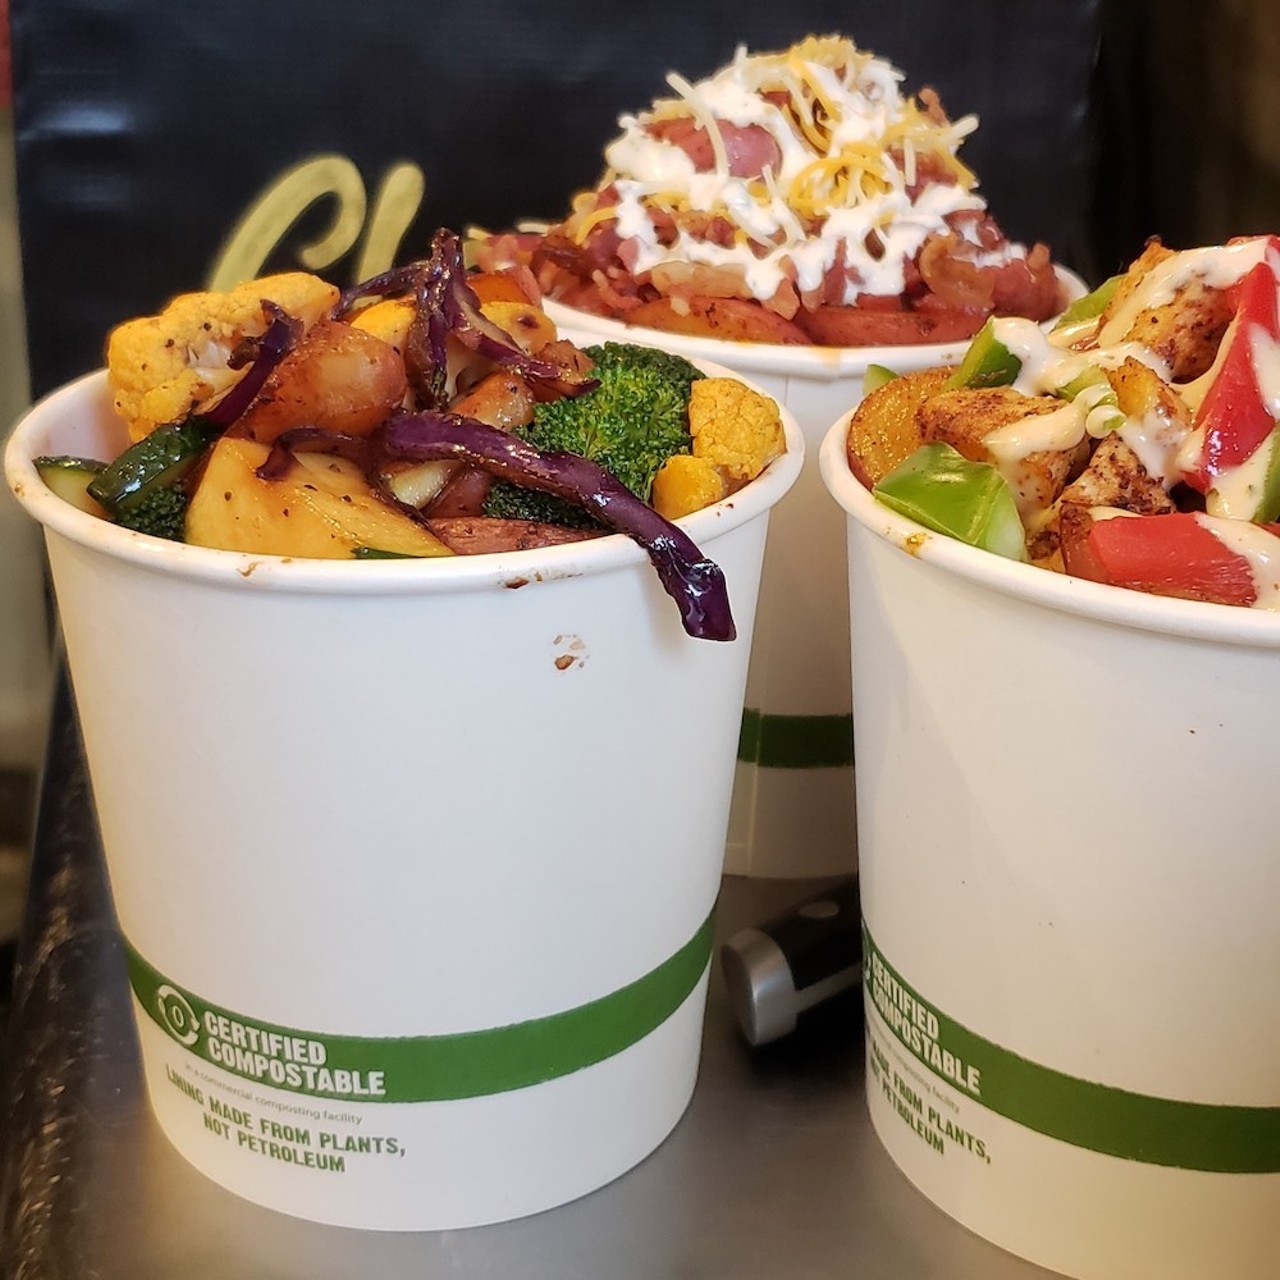 Ma's Irish Kitchen specializes in loaded bowls on bowls.